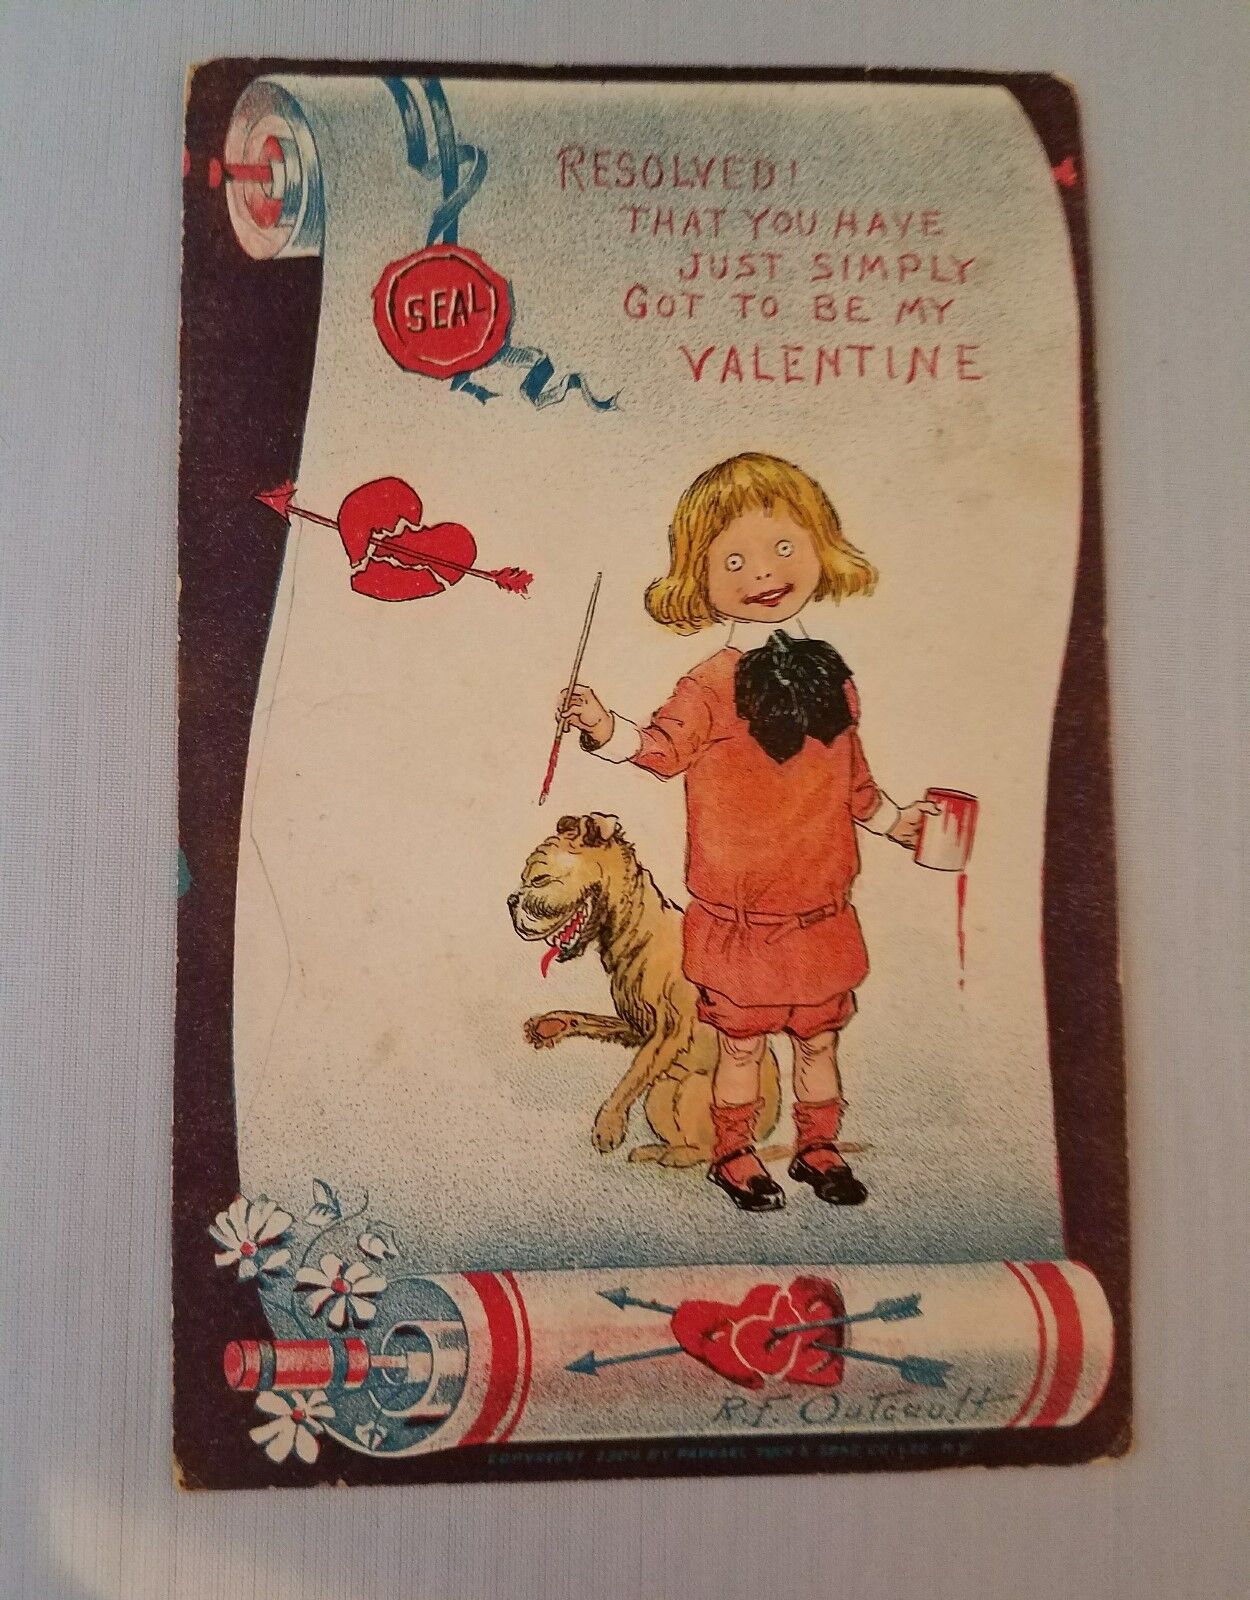 Vintage Valentine's Day Card 'That you have just simply got to be my valentine '